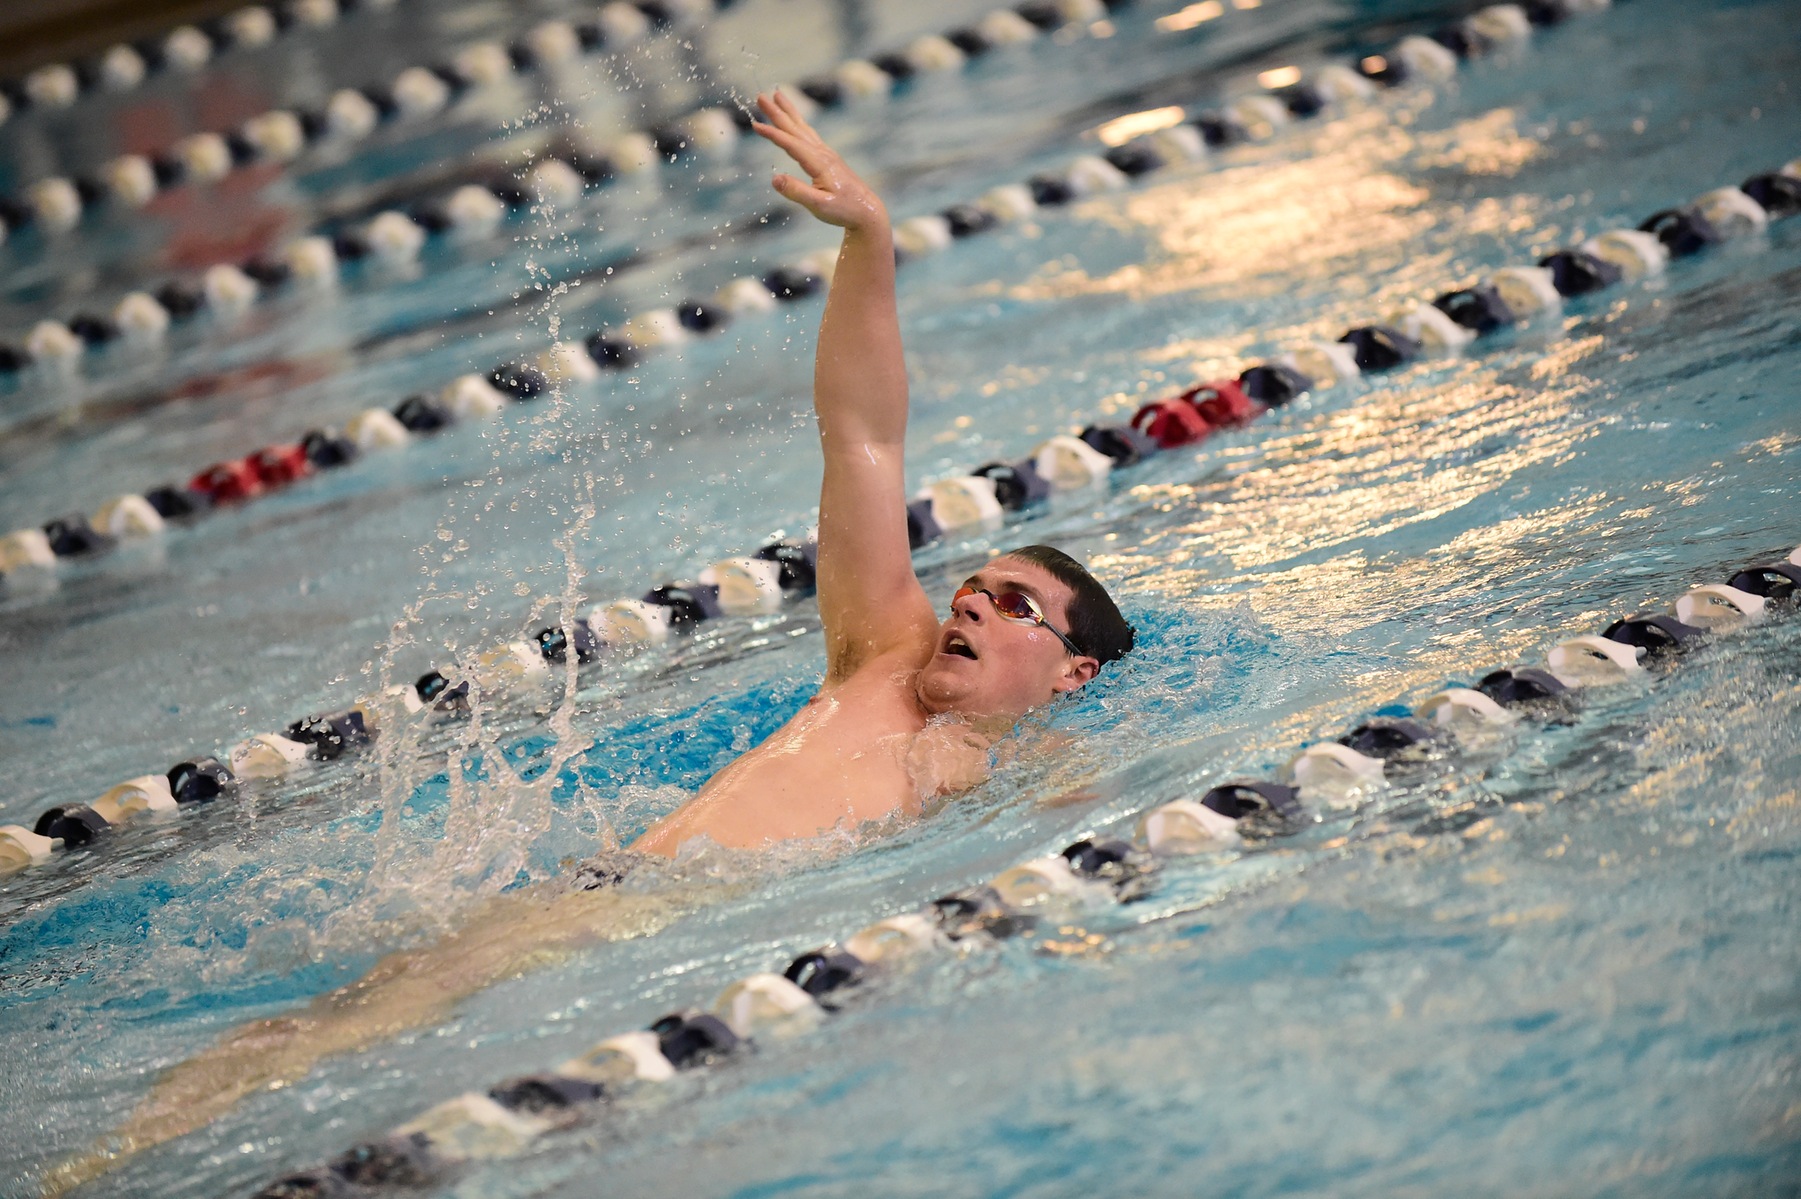 Men's Swimming Heads to Malone, St. Vincent